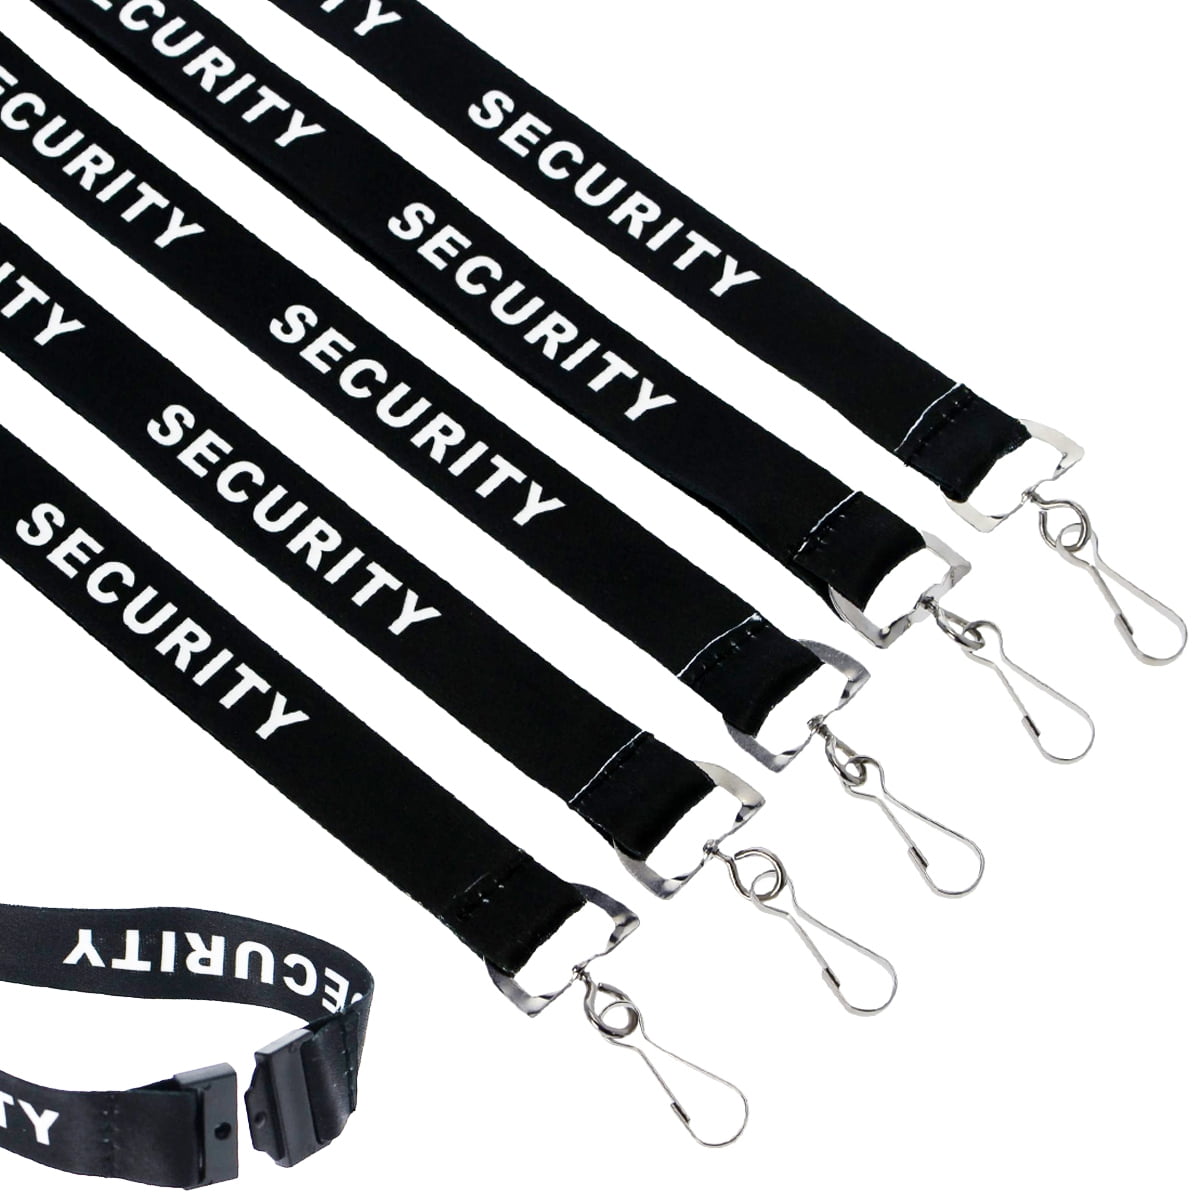 Breakaway Clasp - Add on (with Purchase of A Lanyard Only)